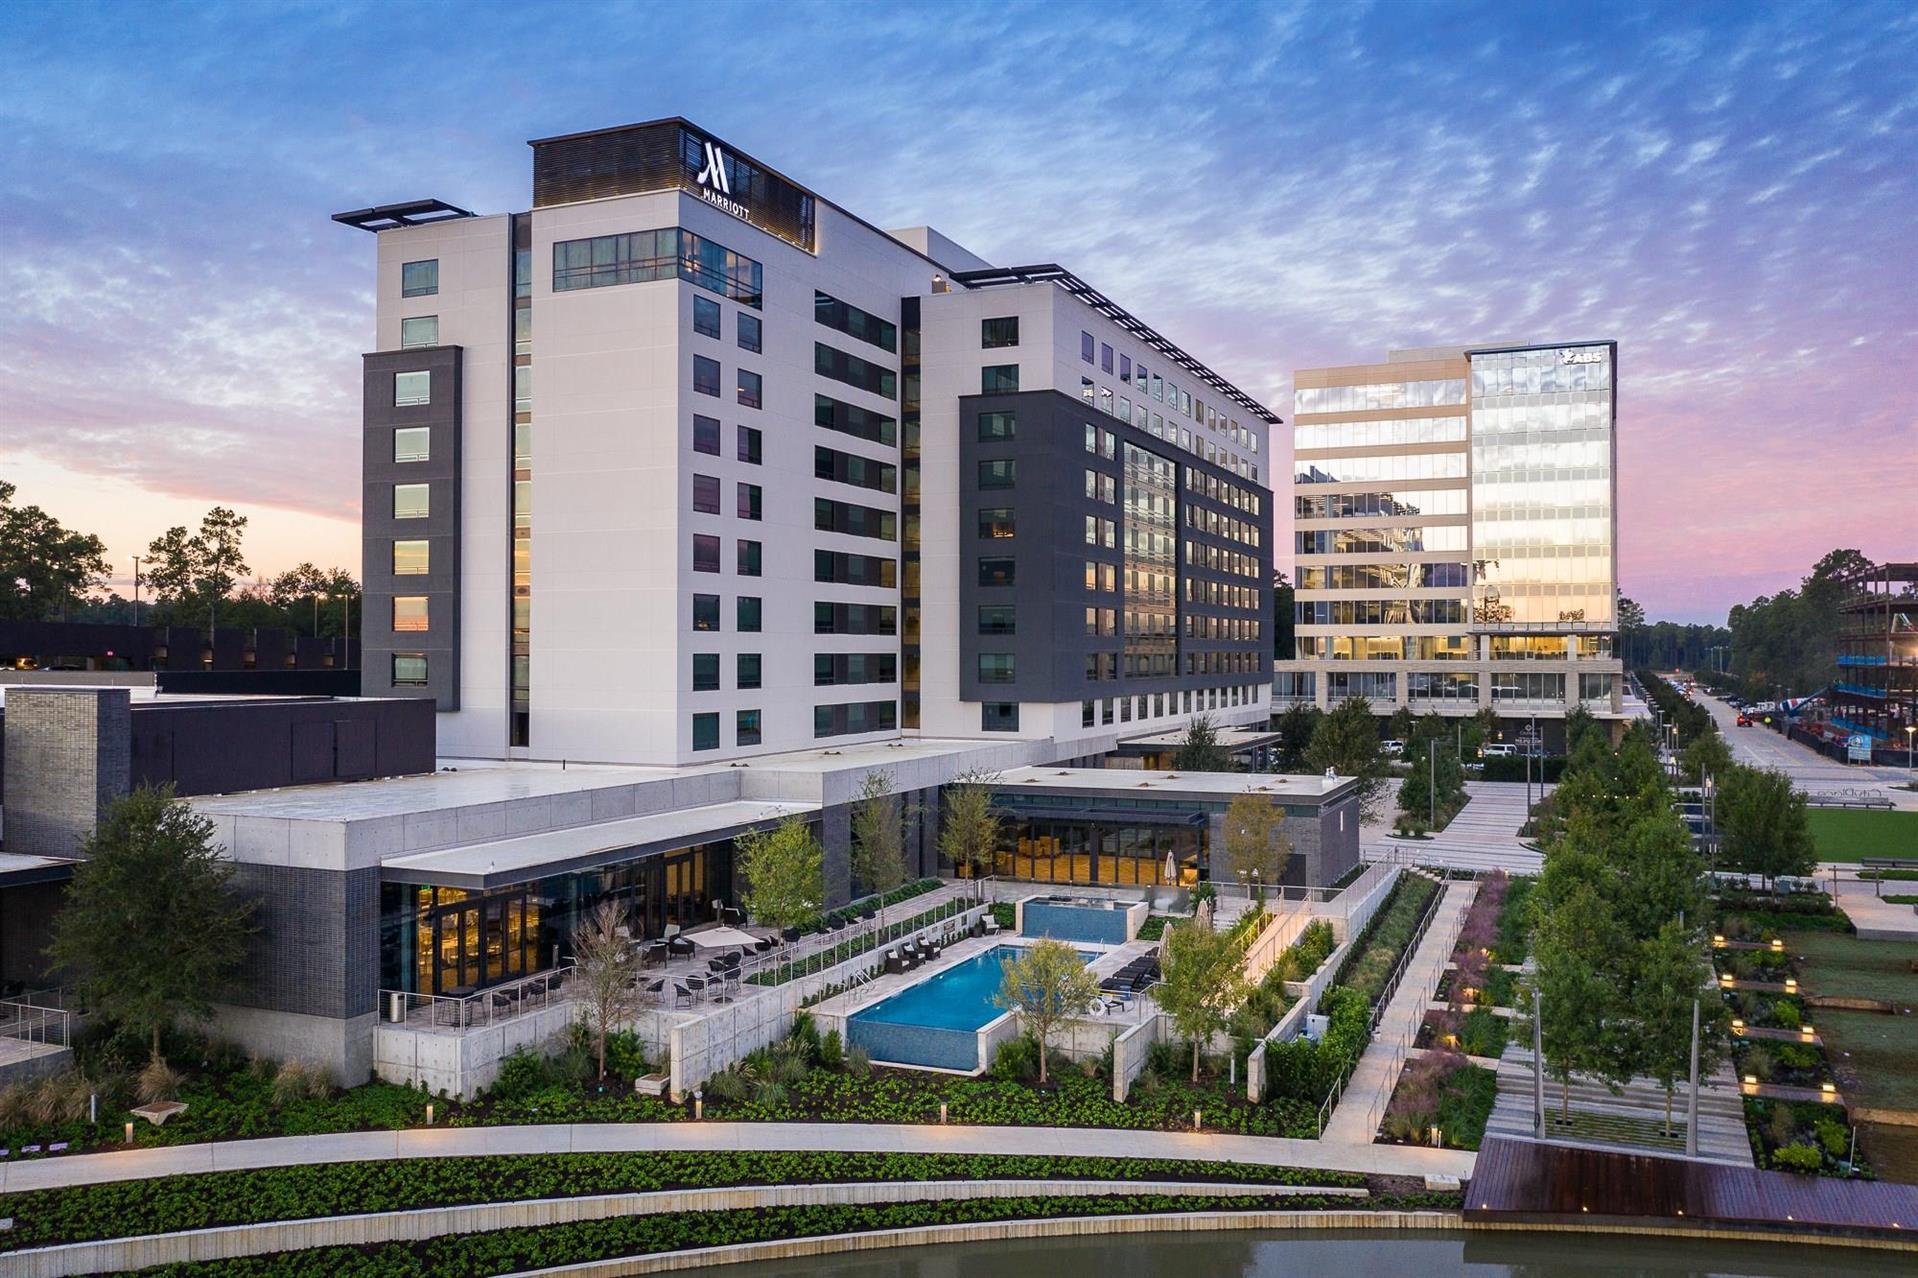 Houston CityPlace Marriott at Springwoods Village in Spring, TX